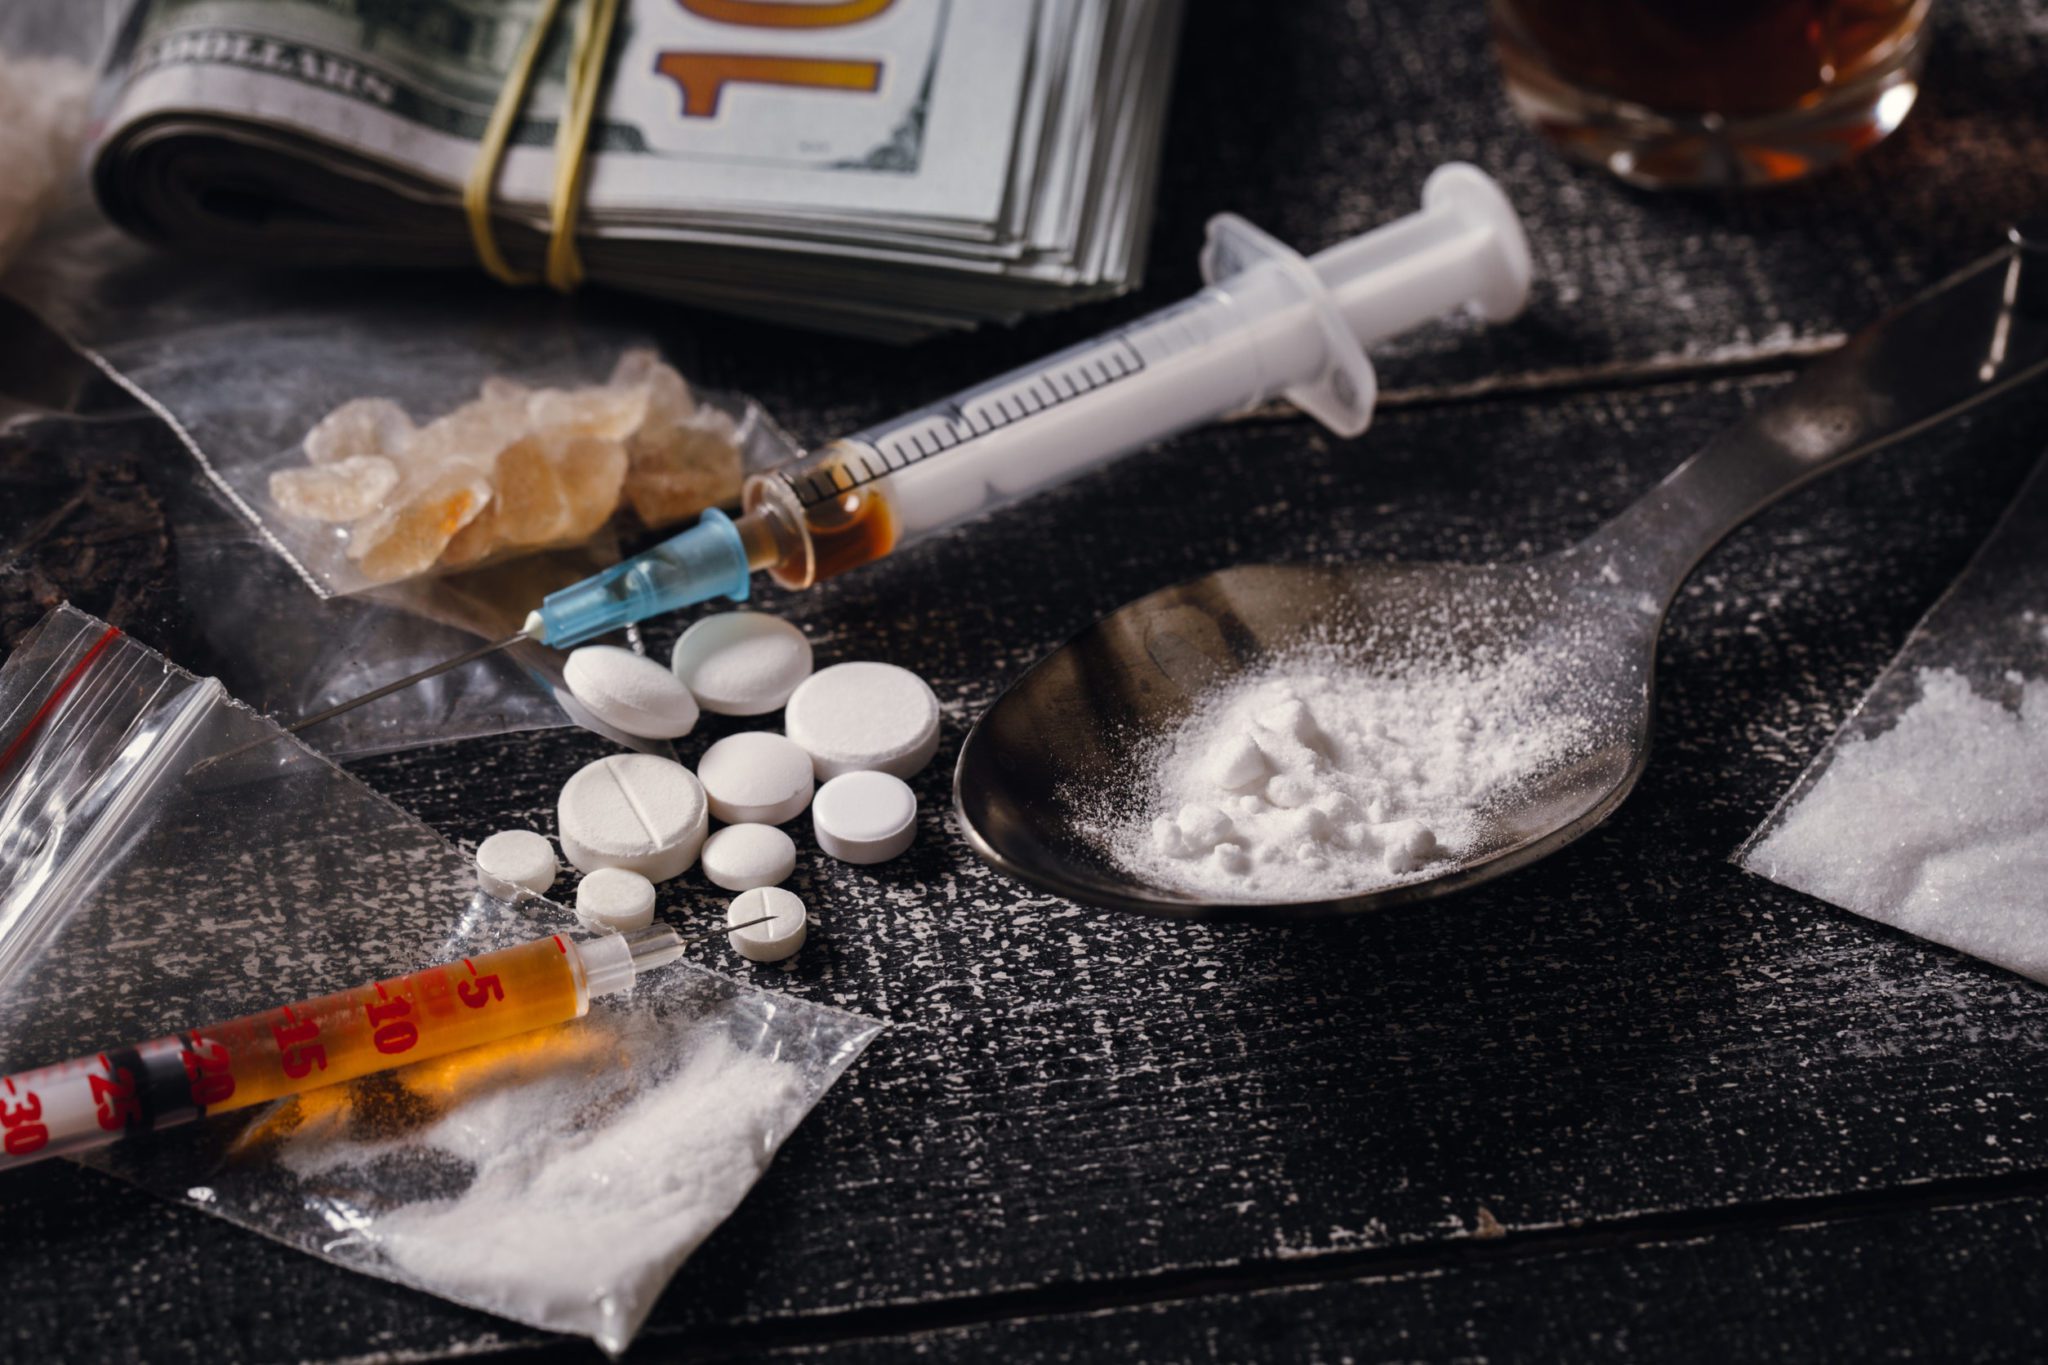 When Is Drug Possession a Felony in Minnesota?